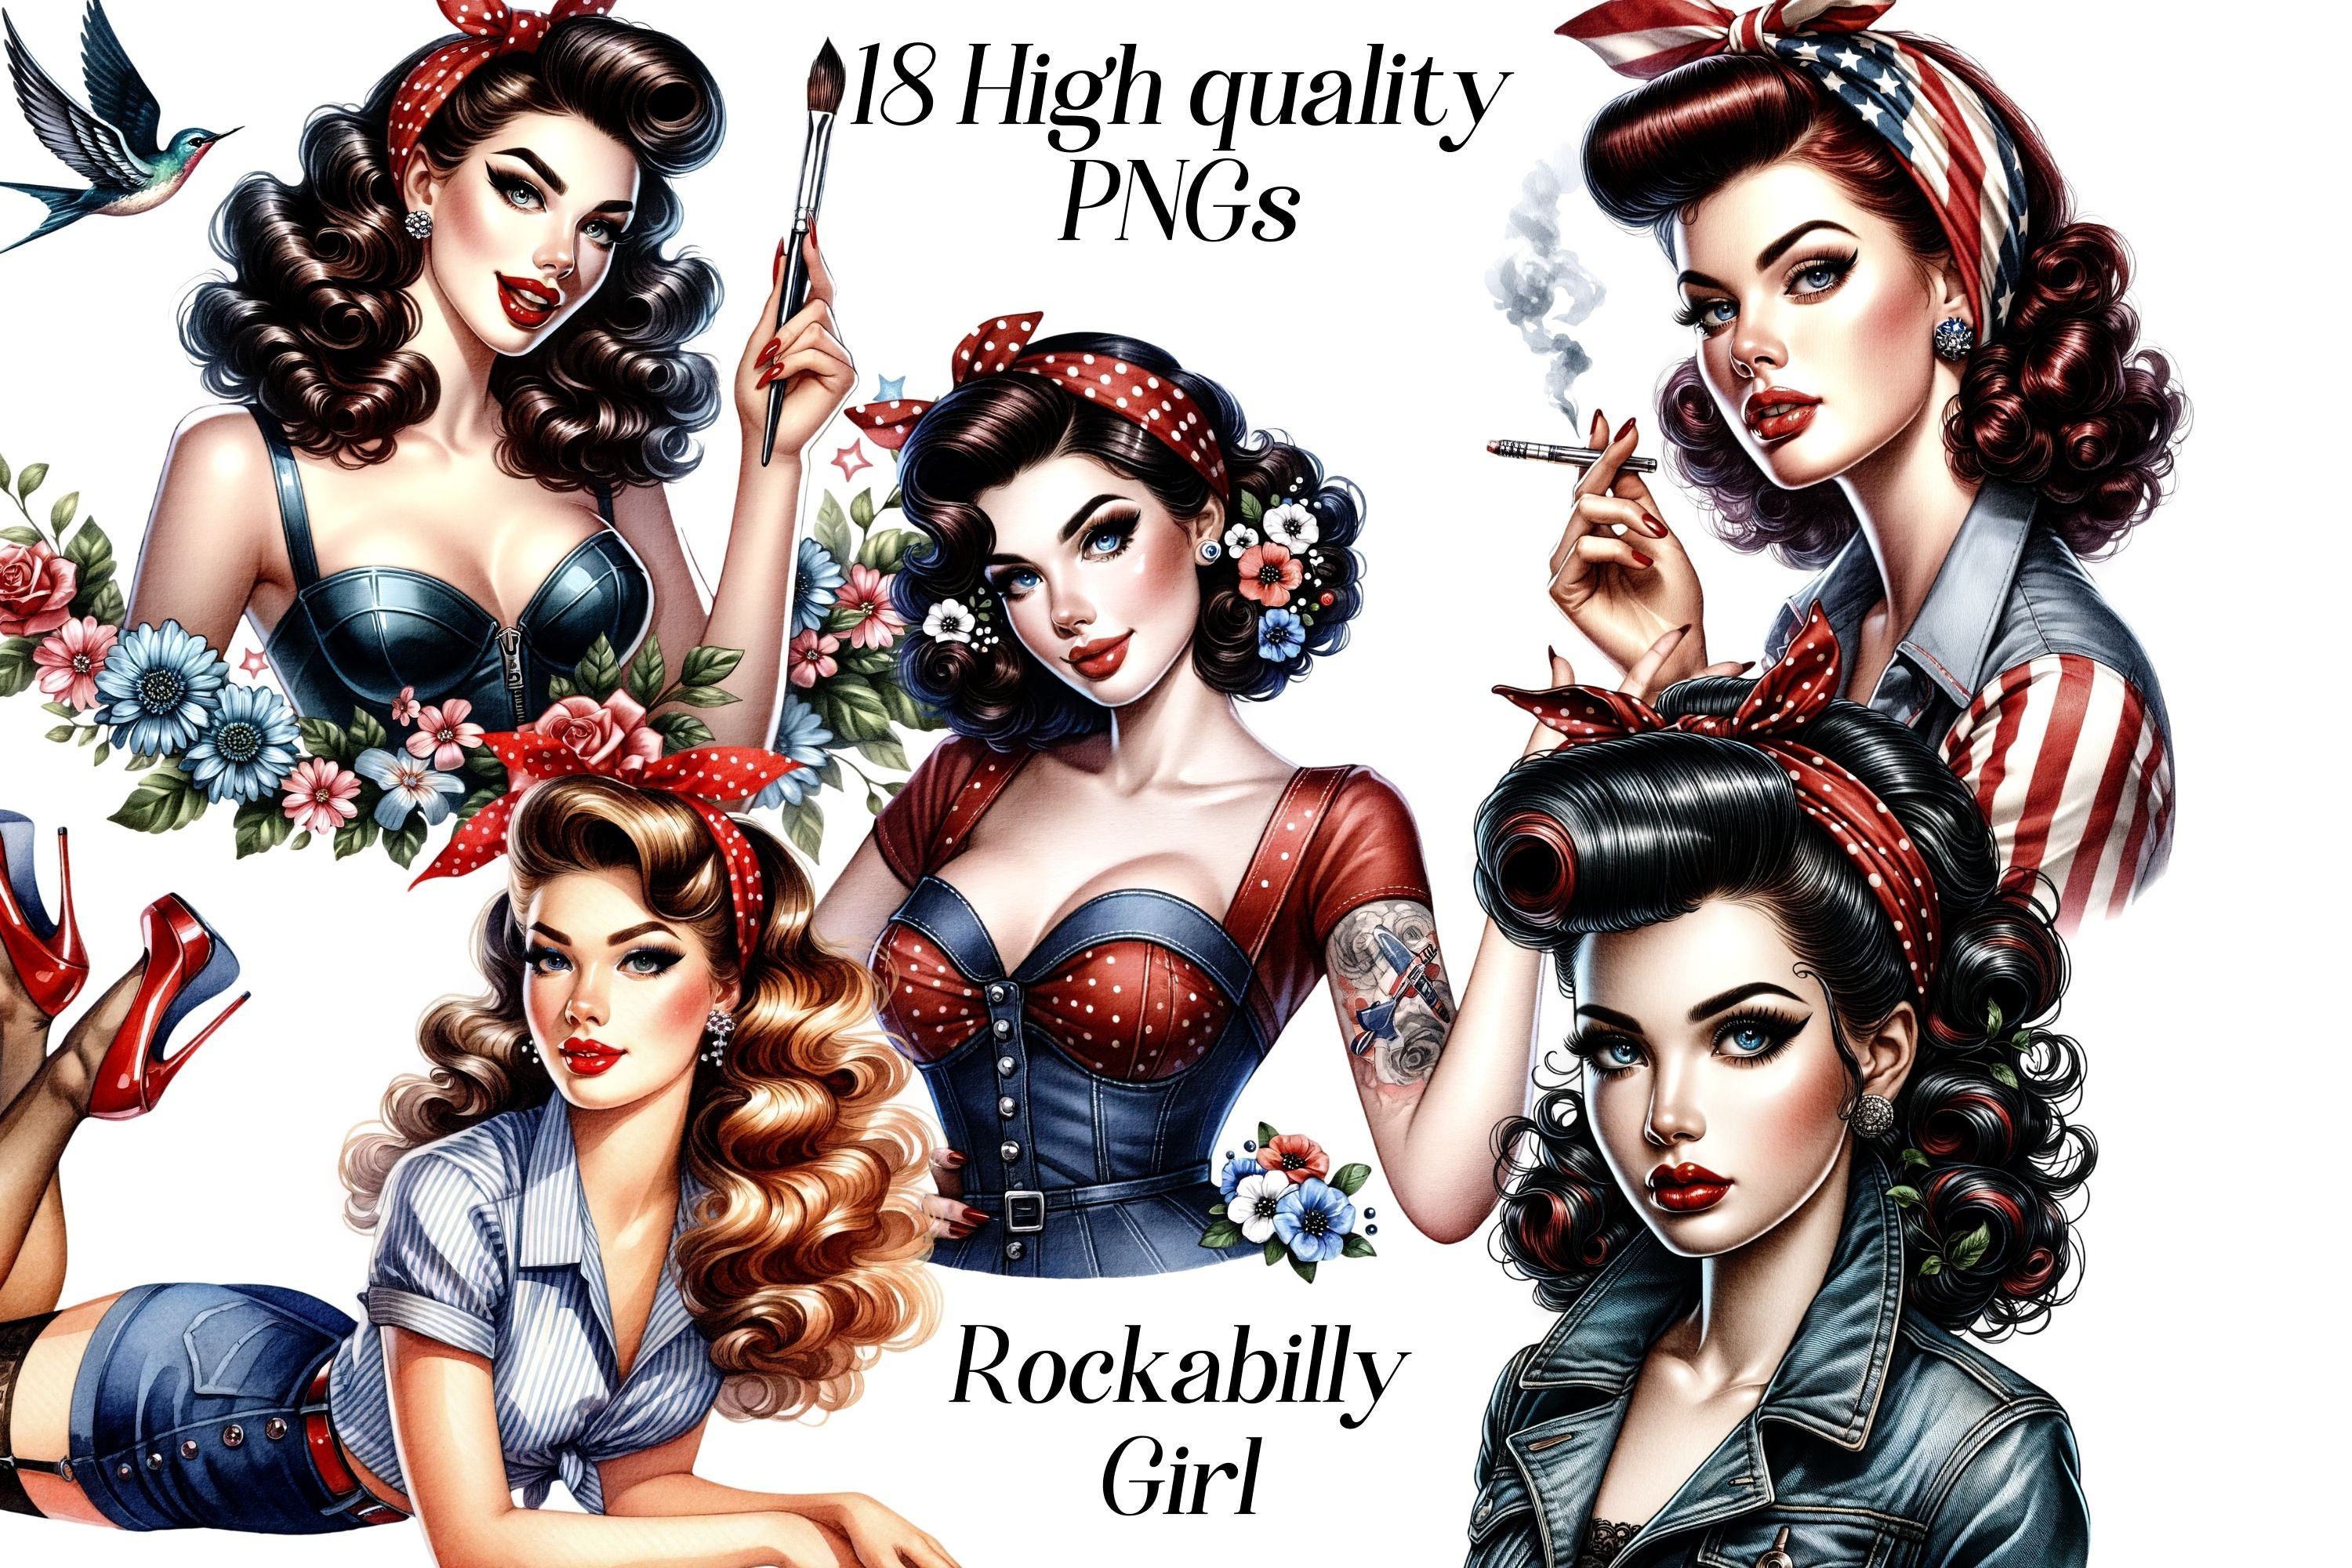 Rockabilly Girl White Transparent, Rockabilly Girl Or Pin Up Girl Hold Th  Wrench And Wearing Red Bandana Vector Illustration, Women, Woman, Girl PNG  Image For Free Download